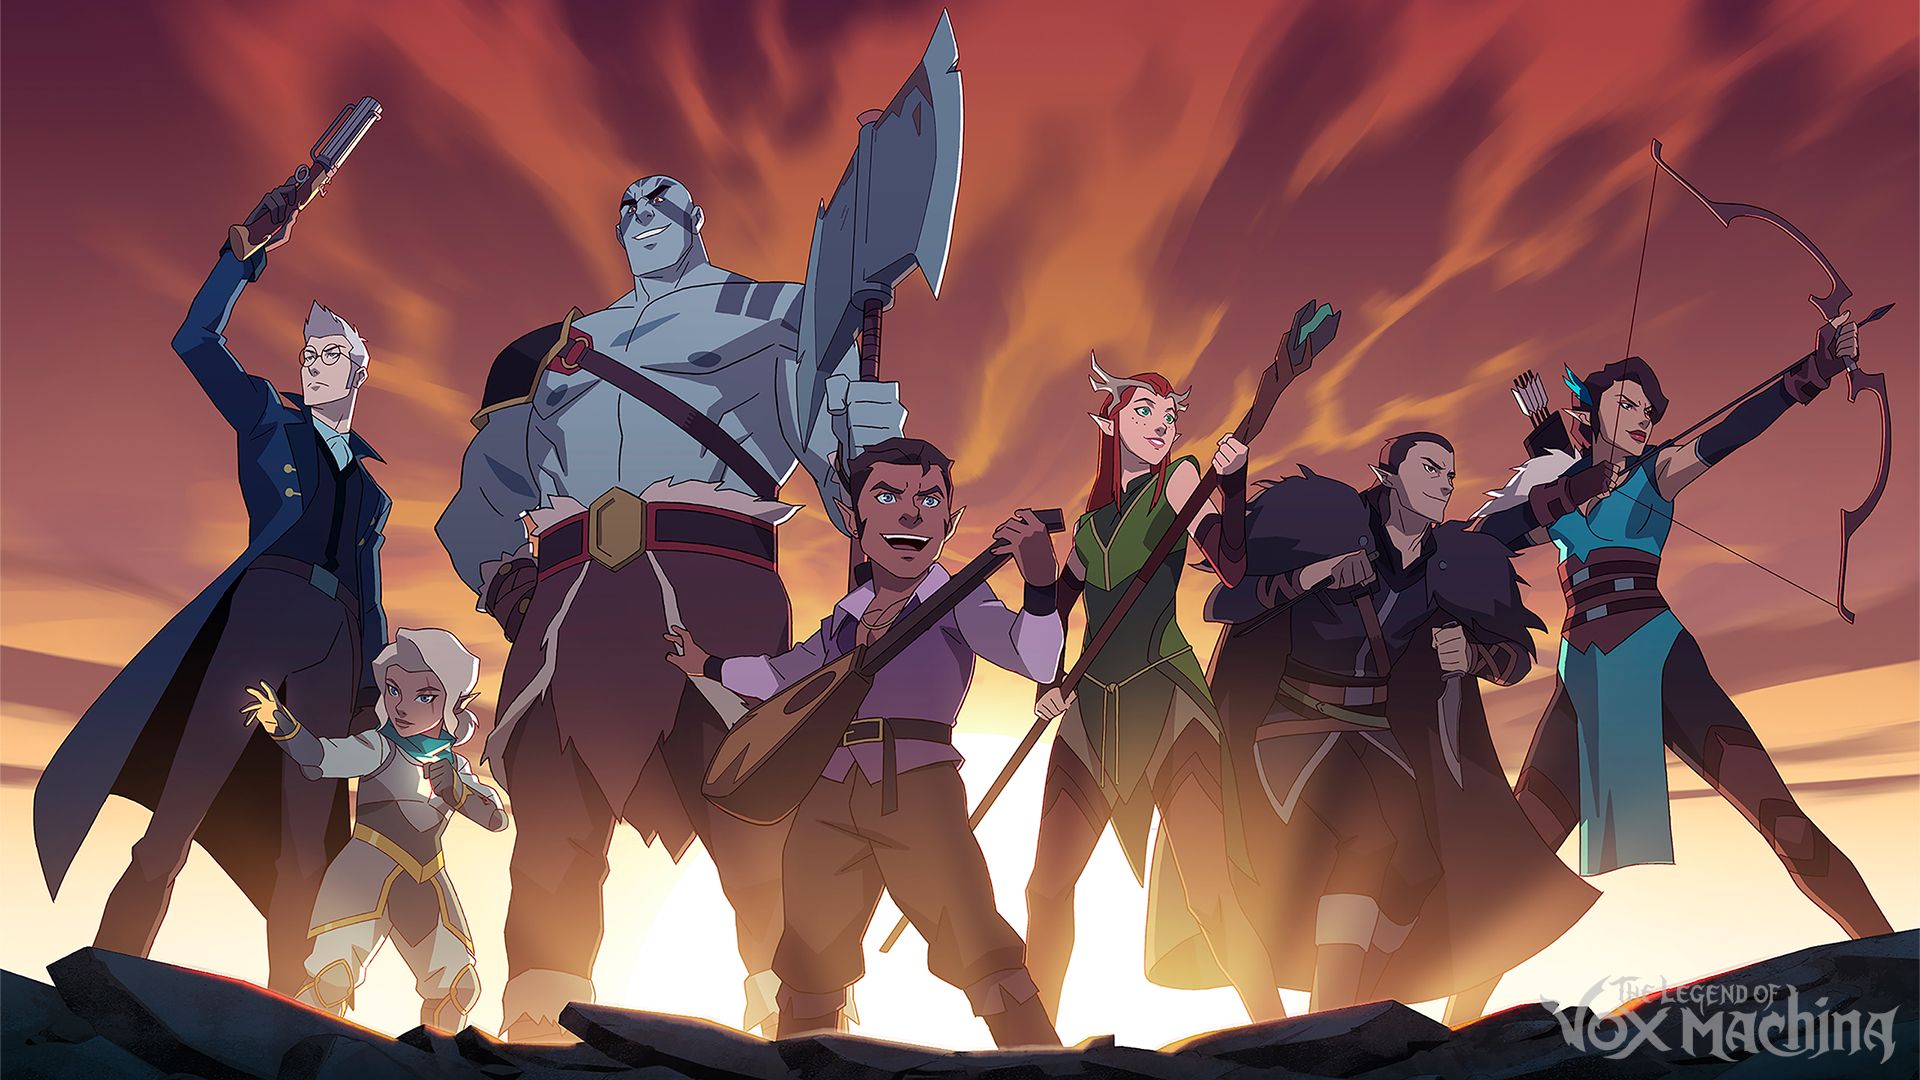 The party in The Legend of Vox Machina does not roleplay in a way that should inspire new D&D players.